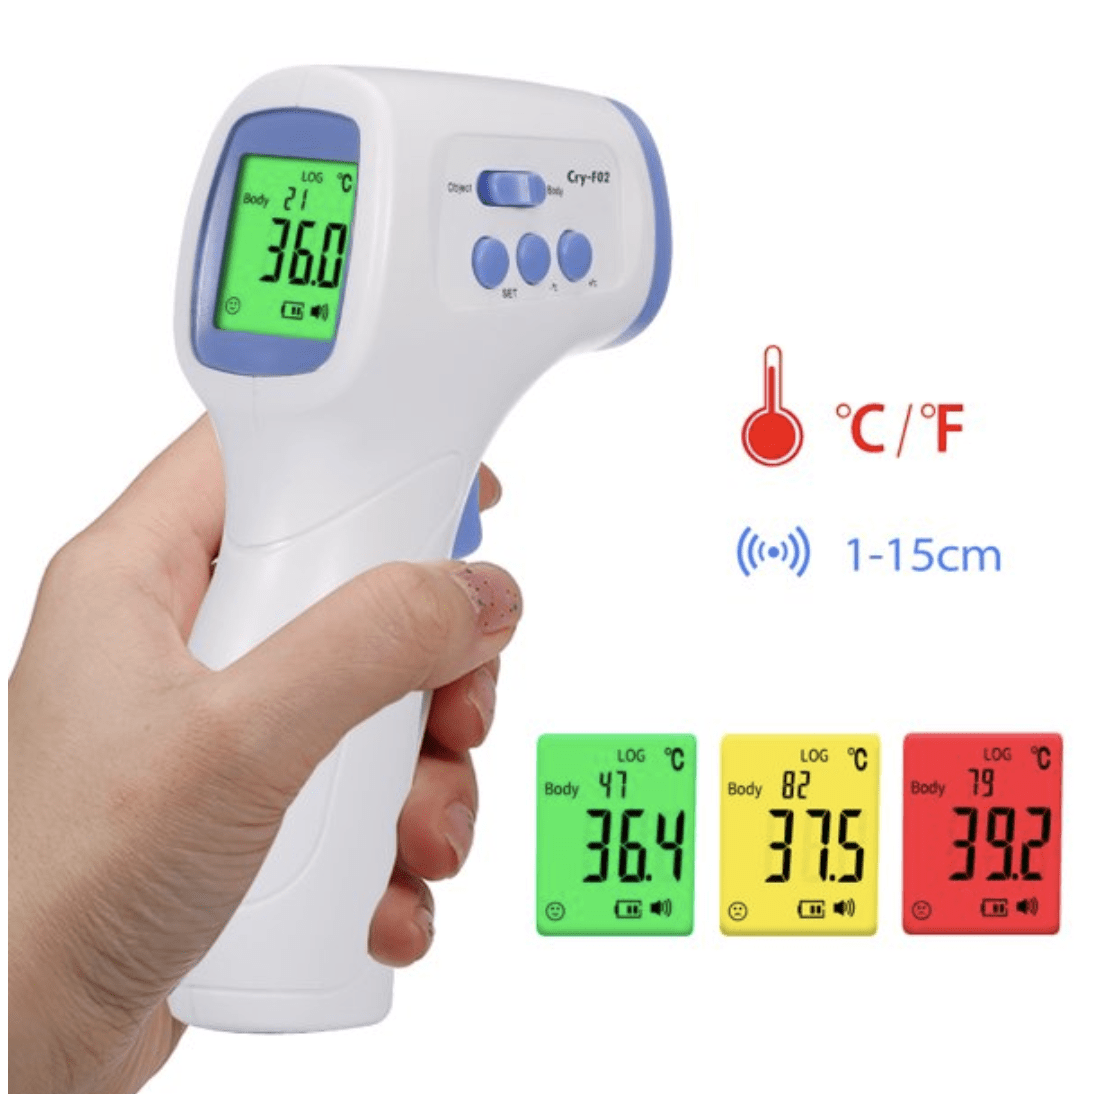 No Contact Thermometer from Walmart